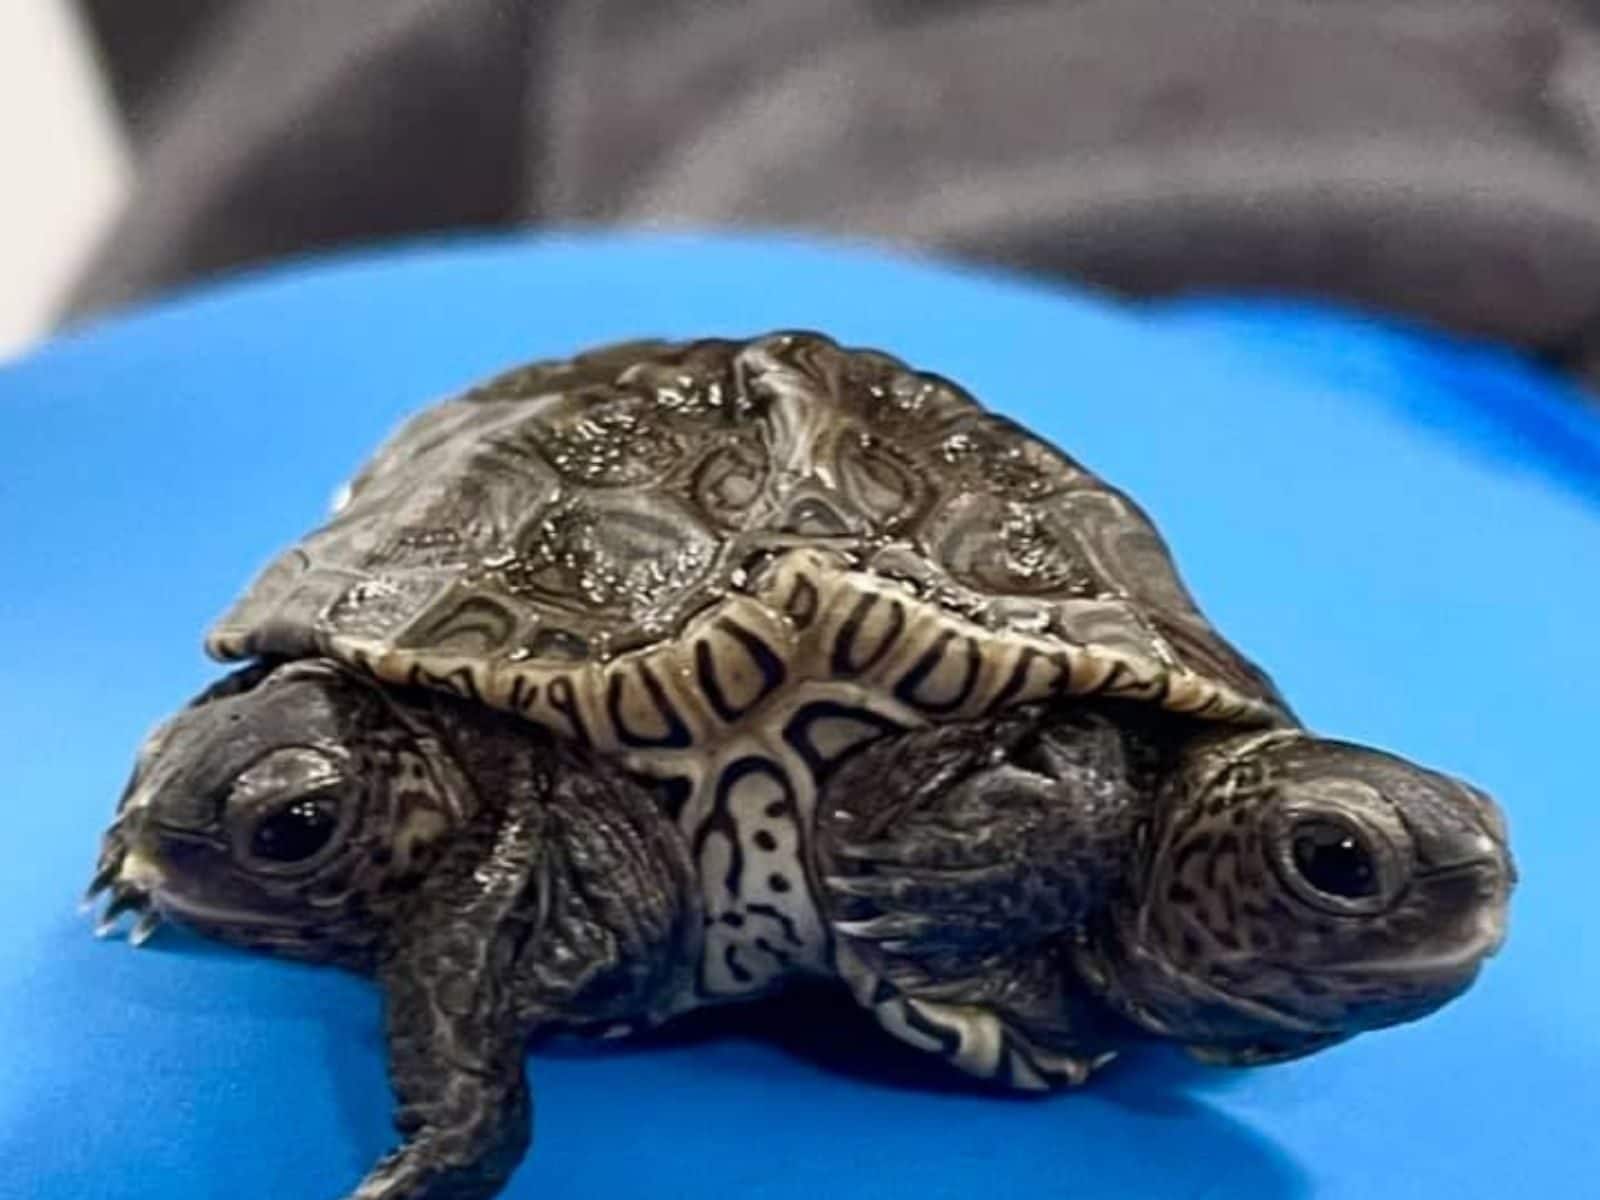 A Rare Two-headed, Six-legged Turtle is Alive and Kicking, Surprising  Scientists